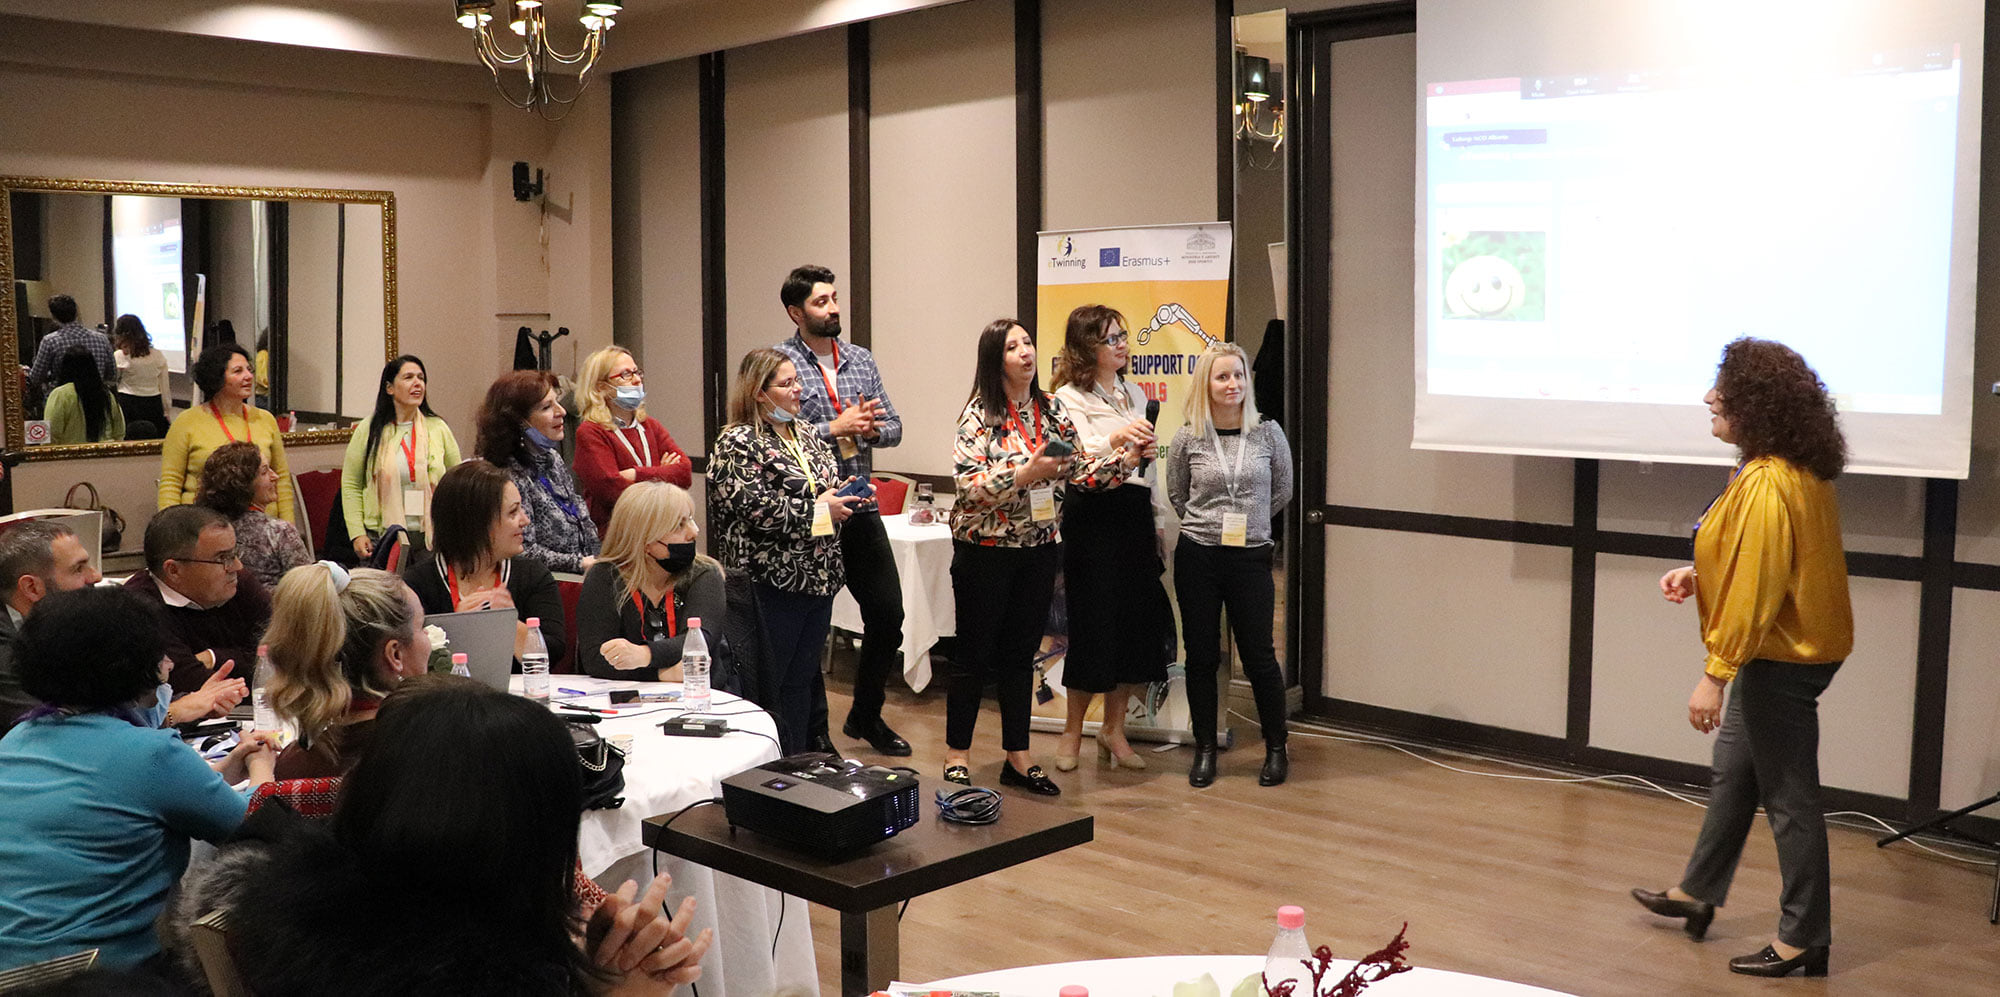 Contact seminar on "eTwinning for Vocational Education"